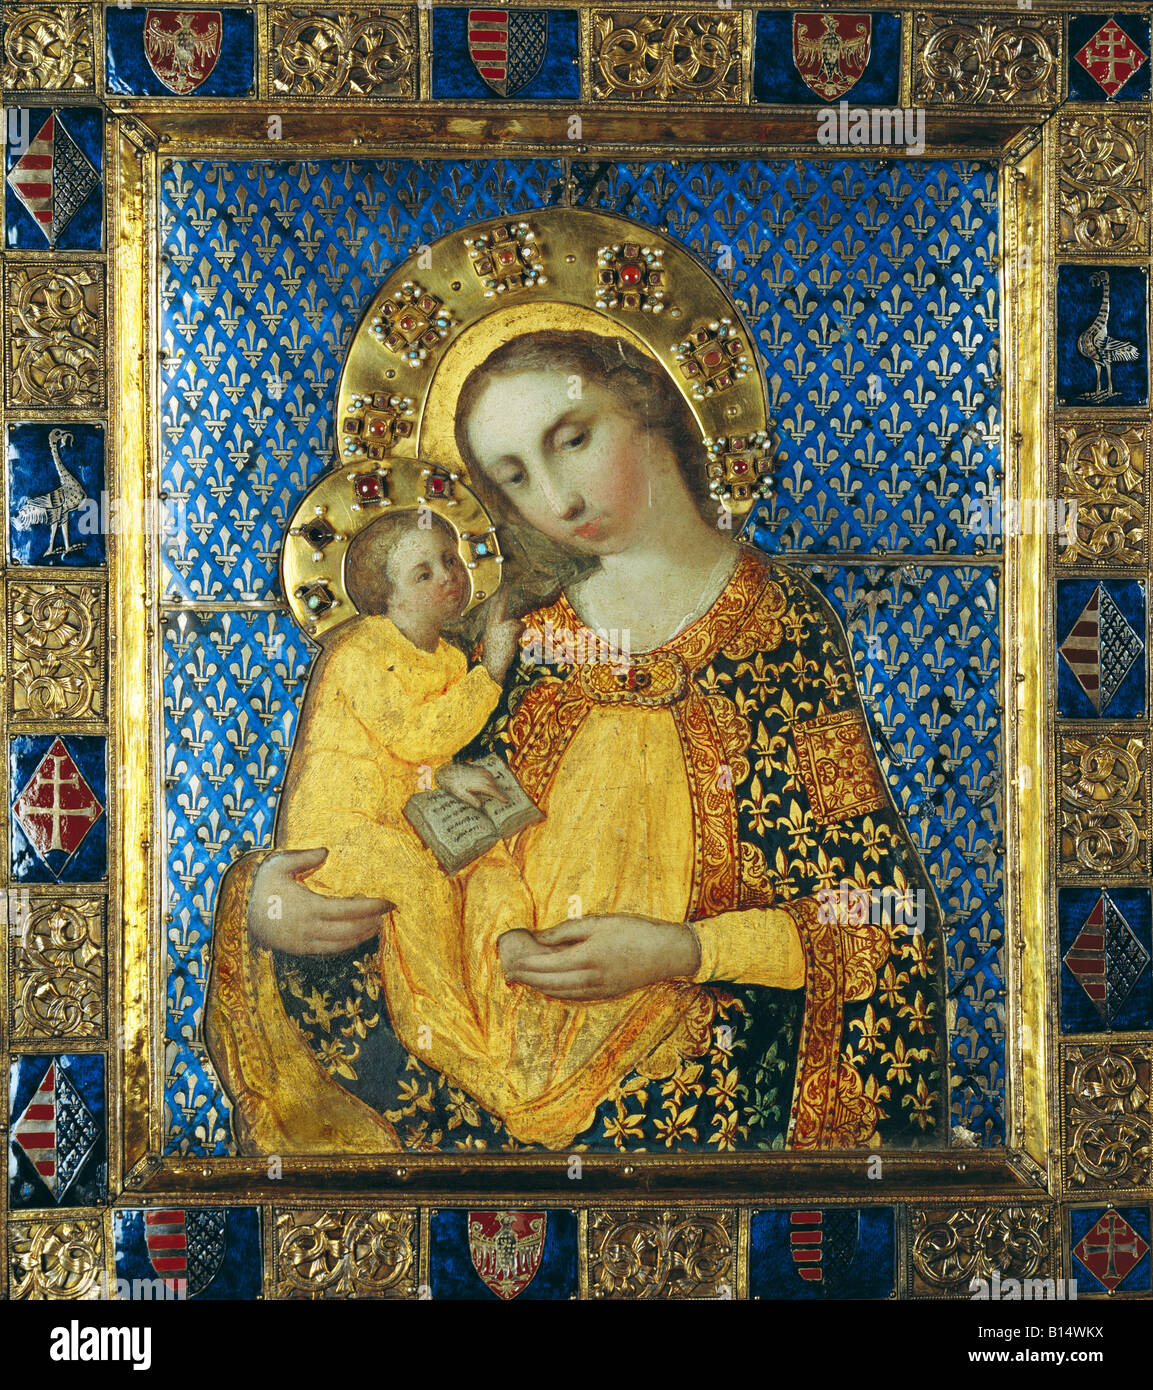 fine arts, religious art, Virgin Mary with child, painting, tempera on wood, gilted silver sheet with enamel and jewelry, Hungary, pre 1367, Aachen Minster Treasure,  , Artist's Copyright has not to be cleared Stock Photo